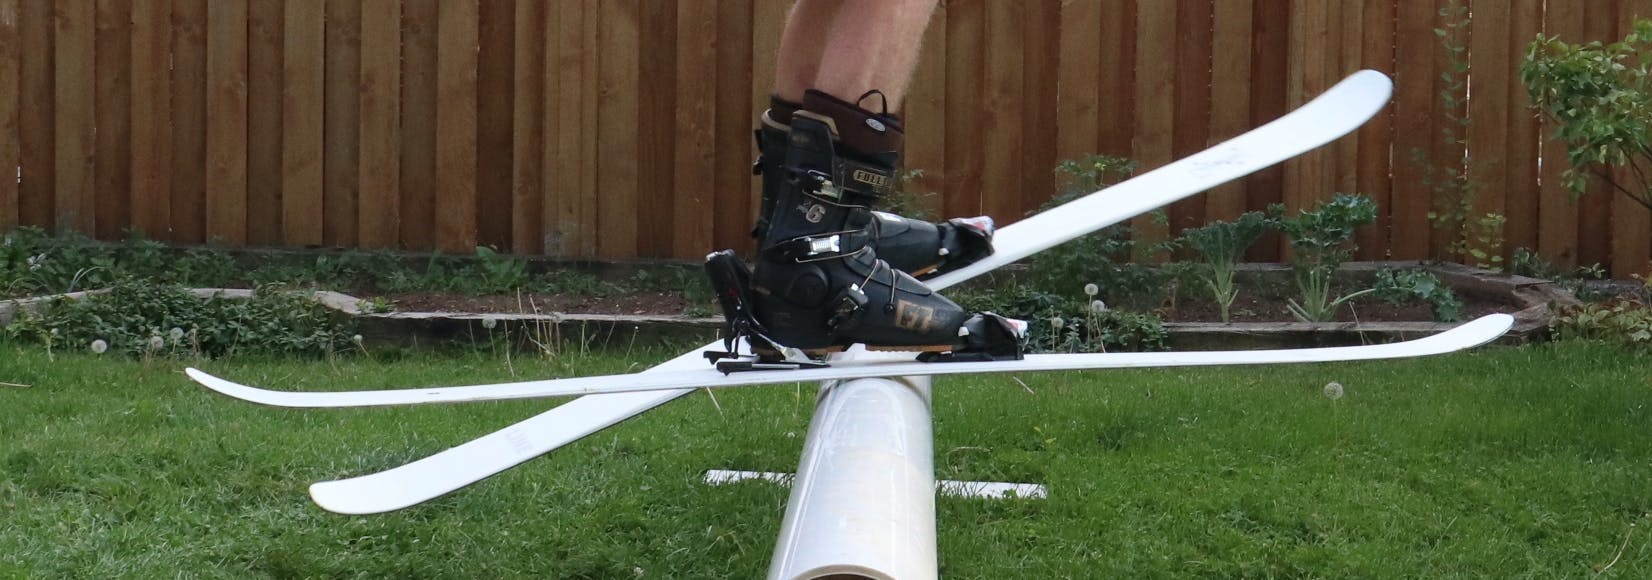 A skier using skis on a rail in the backyard with grass. 